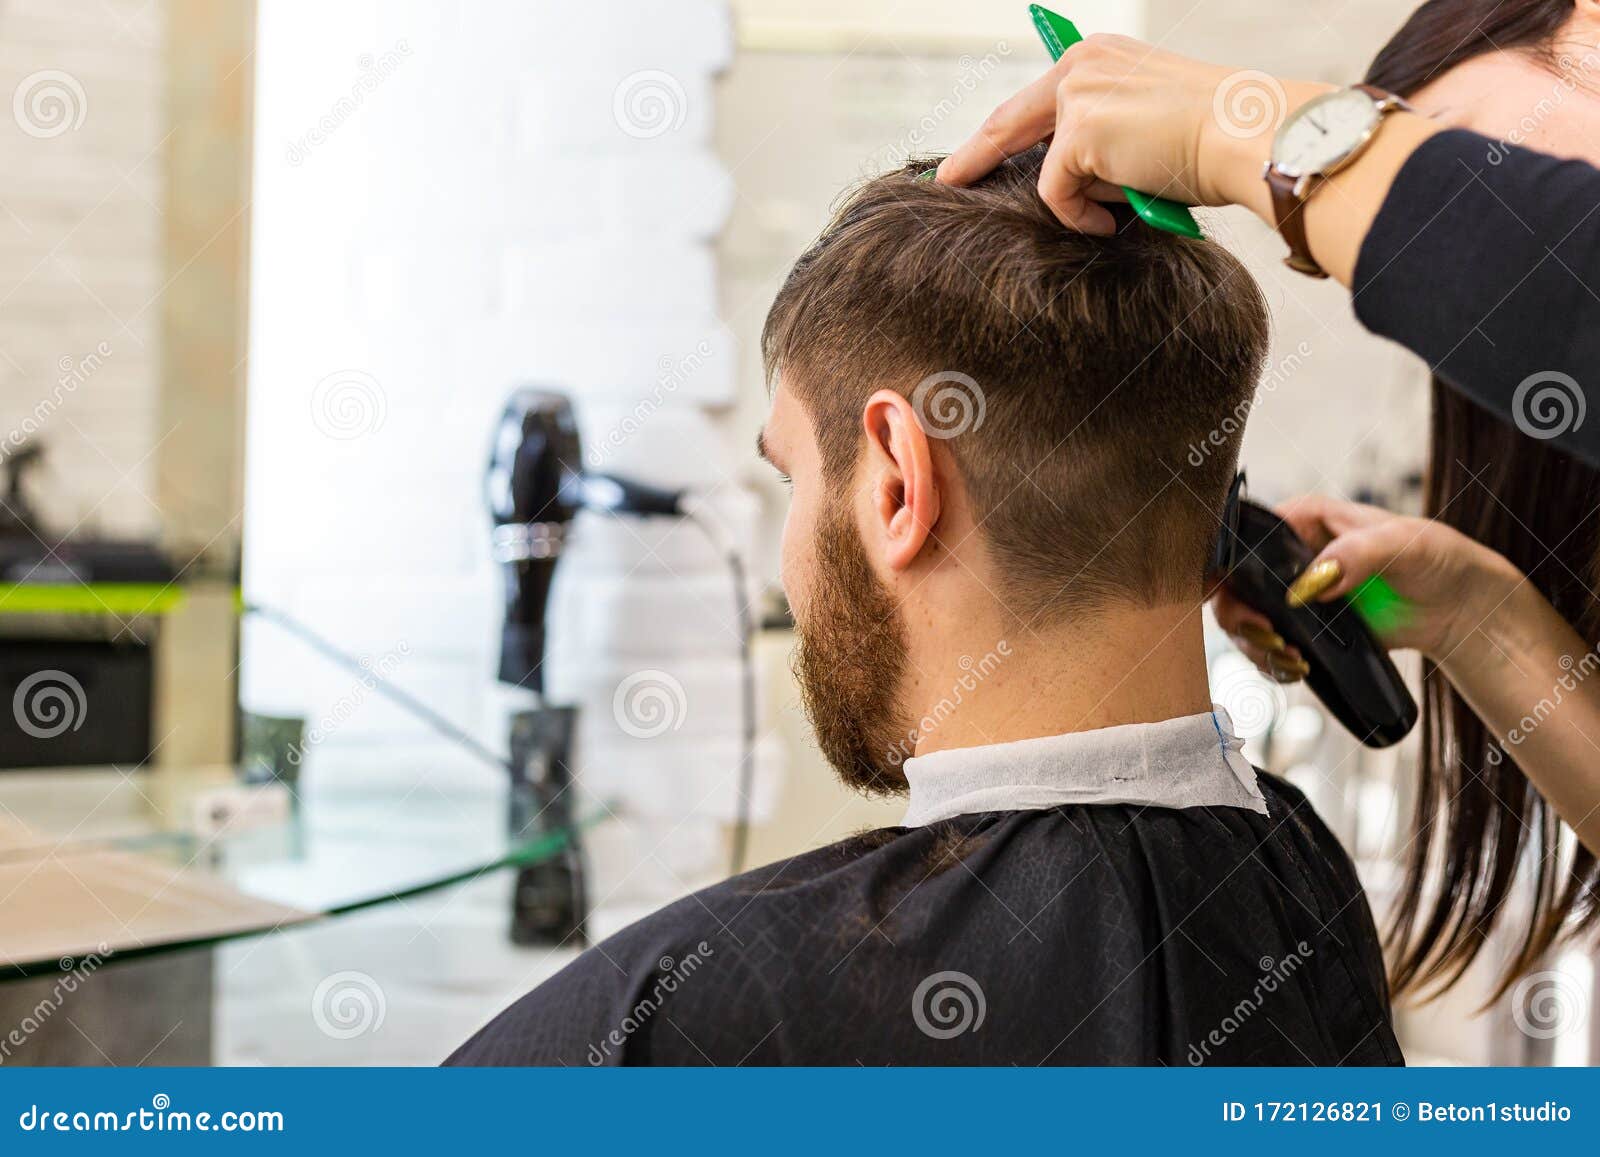 Hairdresser Doing Haircut for Male Client, Man with Beard Using Professional  Hairdresser Tools, Equipment on Hairdresser Work Stock Image - Image of  cutting, barber: 172126821